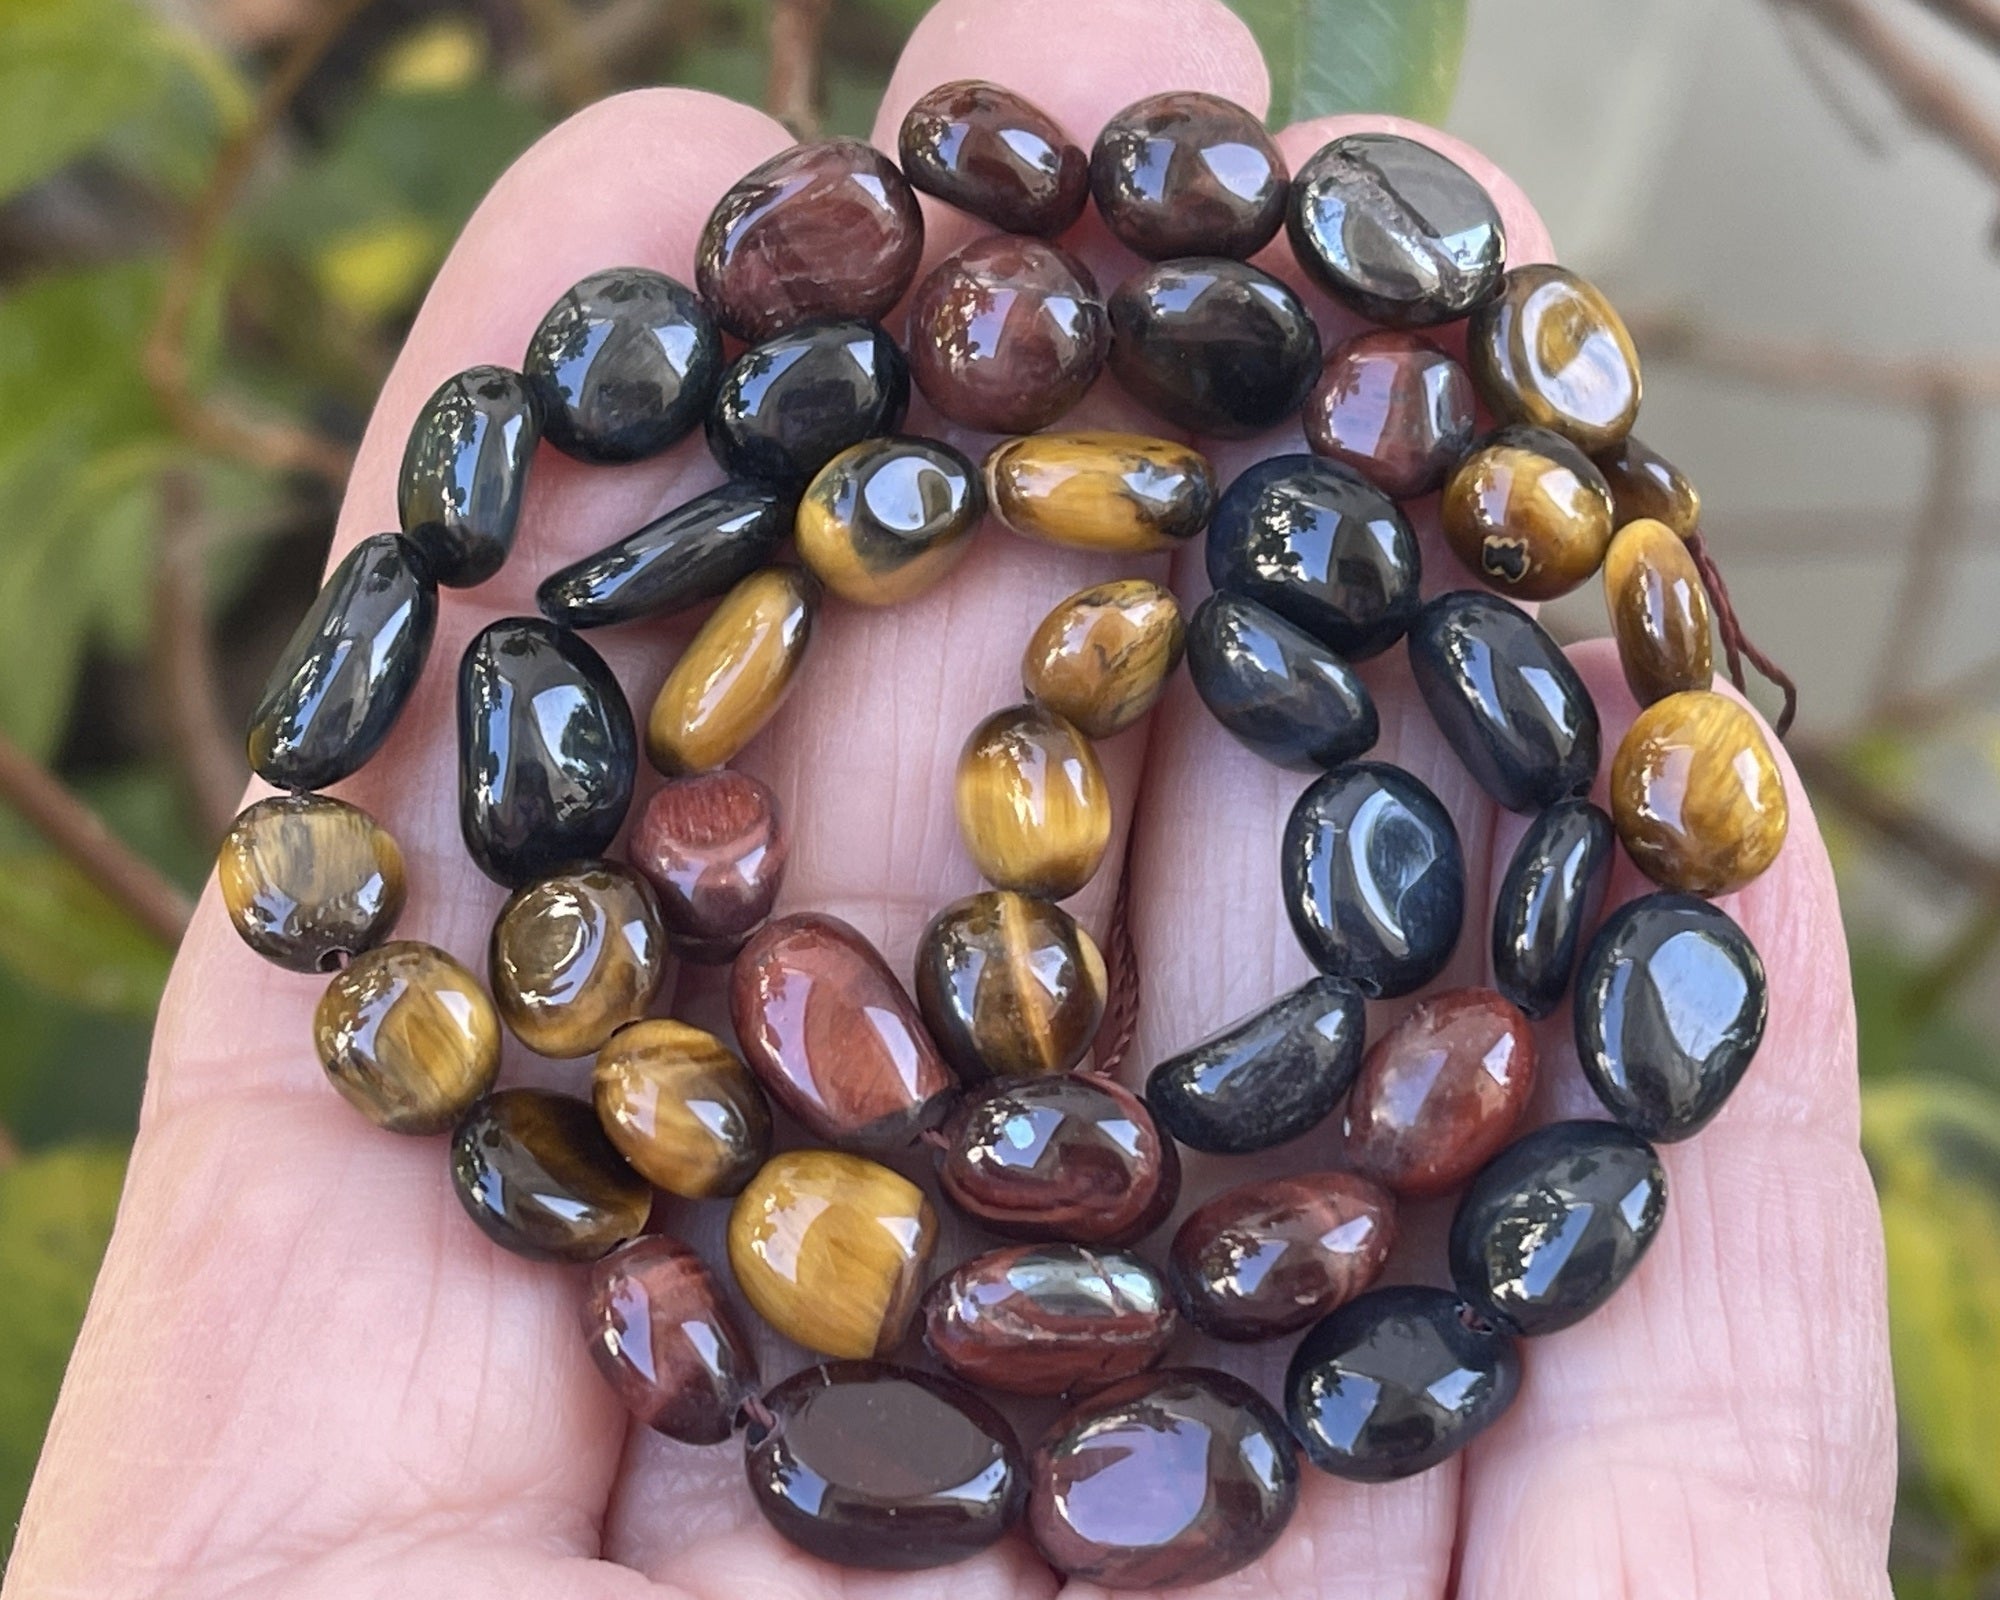 Multicolor Tiger Eye small nuggets natural gemstone pebble beads 15.5" strand